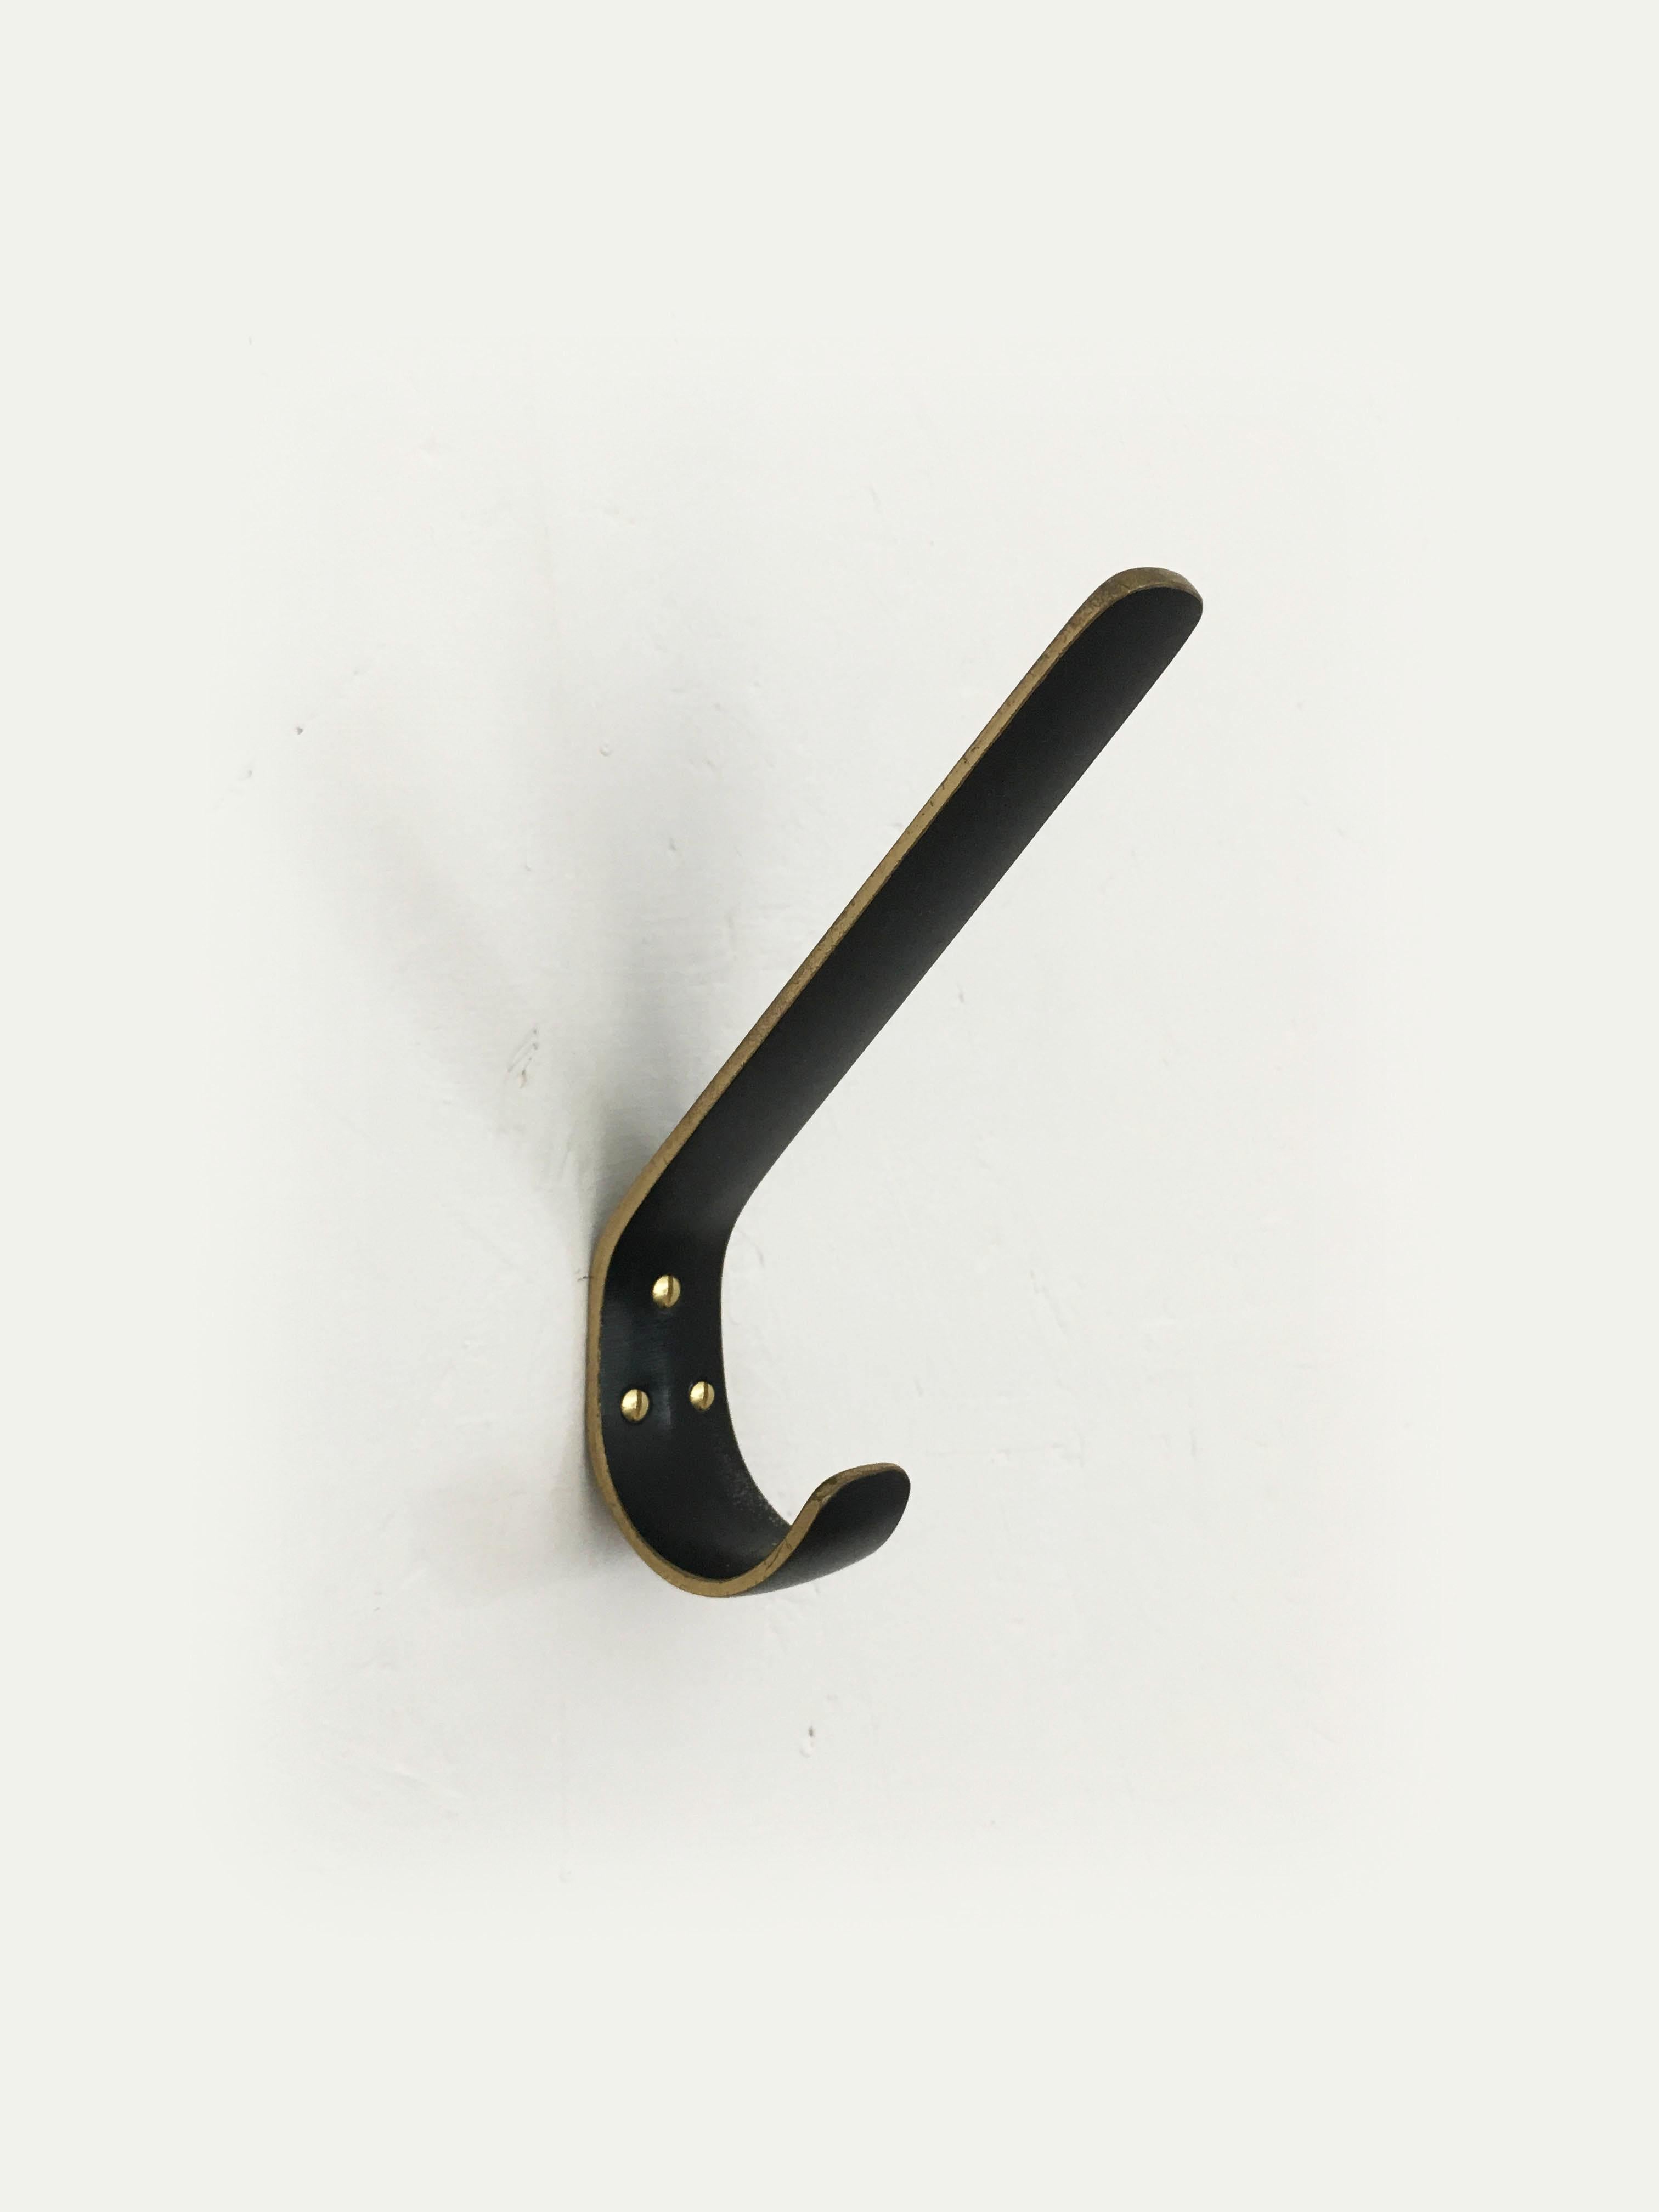 A set of very rare nine beautiful Austrian brass wall hooks, made of black-finished brass, partly polished, executed in the 1950s by Hertha Baller, Austria. A large and impressive design, in excellent condition, very minimal gentle wear.. with